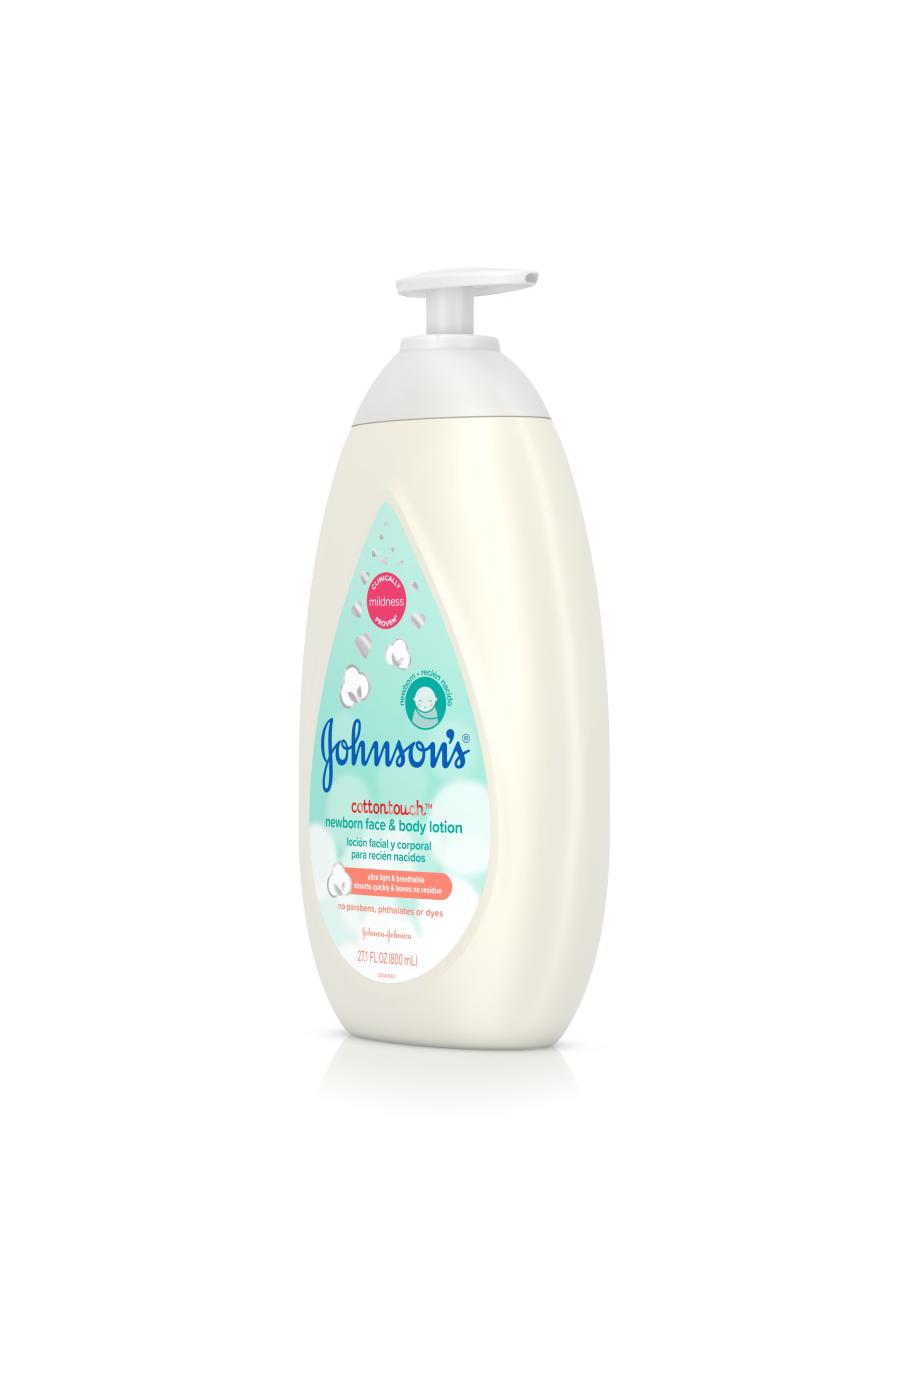 Johnson's Baby Cottontouch Newborn Face & Body Lotion; image 8 of 8